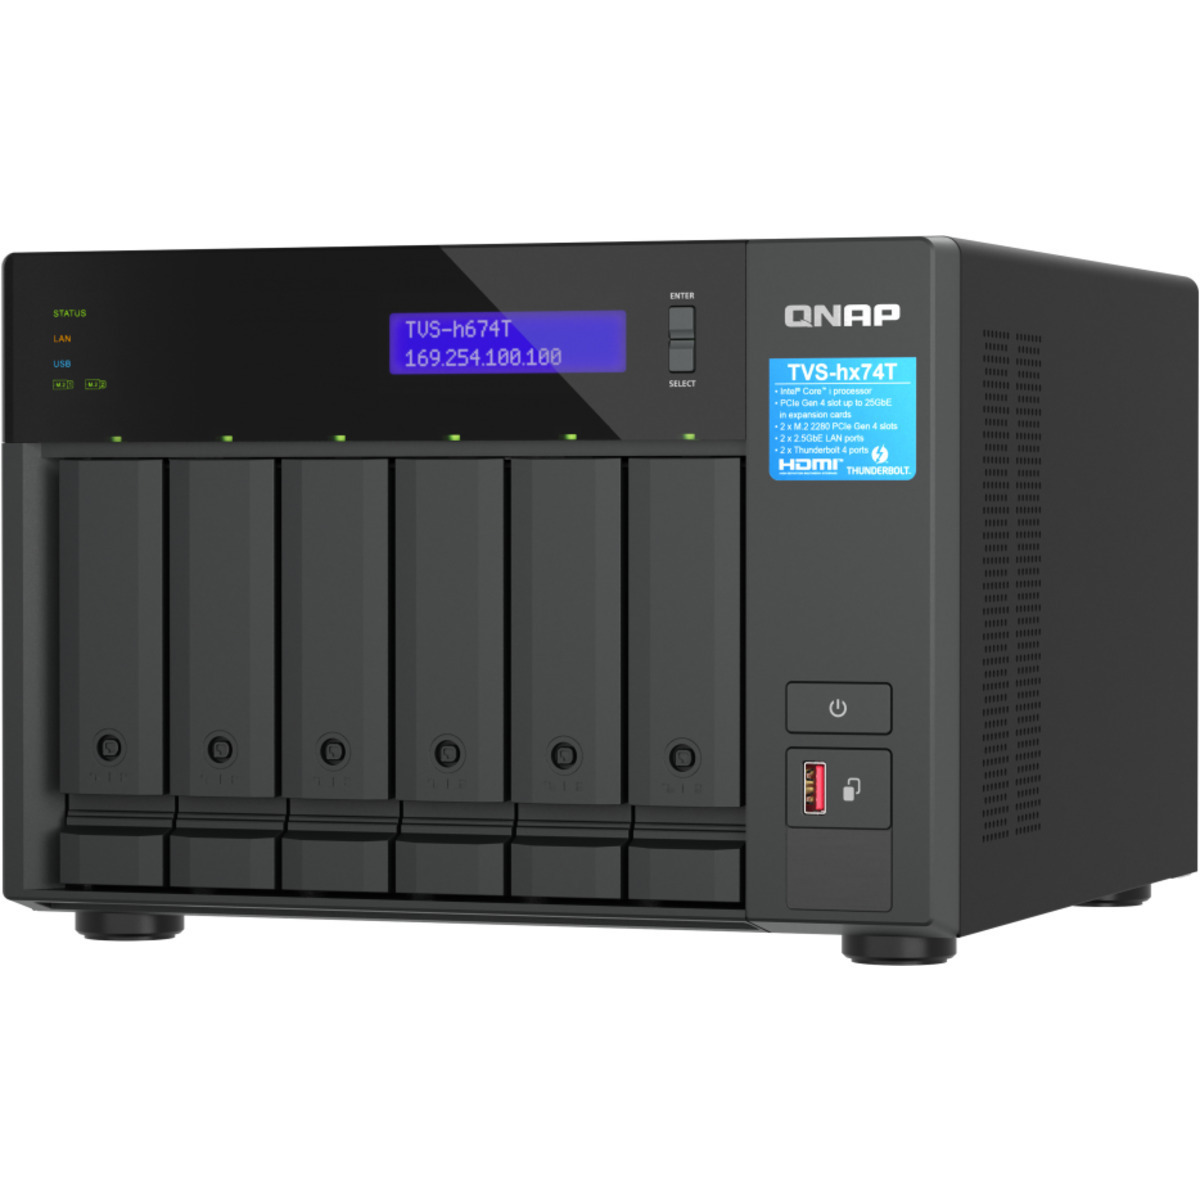 QNAP TVS-h674T Core i5 Thunderbolt 4 54tb 6-Bay Desktop Multimedia / Power User / Business DAS-NAS - Combo Direct + Network Storage Device 3x18tb Seagate EXOS X18 ST18000NM000J 3.5 7200rpm SATA 6Gb/s HDD ENTERPRISE Class Drives Installed - Burn-In Tested TVS-h674T Core i5 Thunderbolt 4